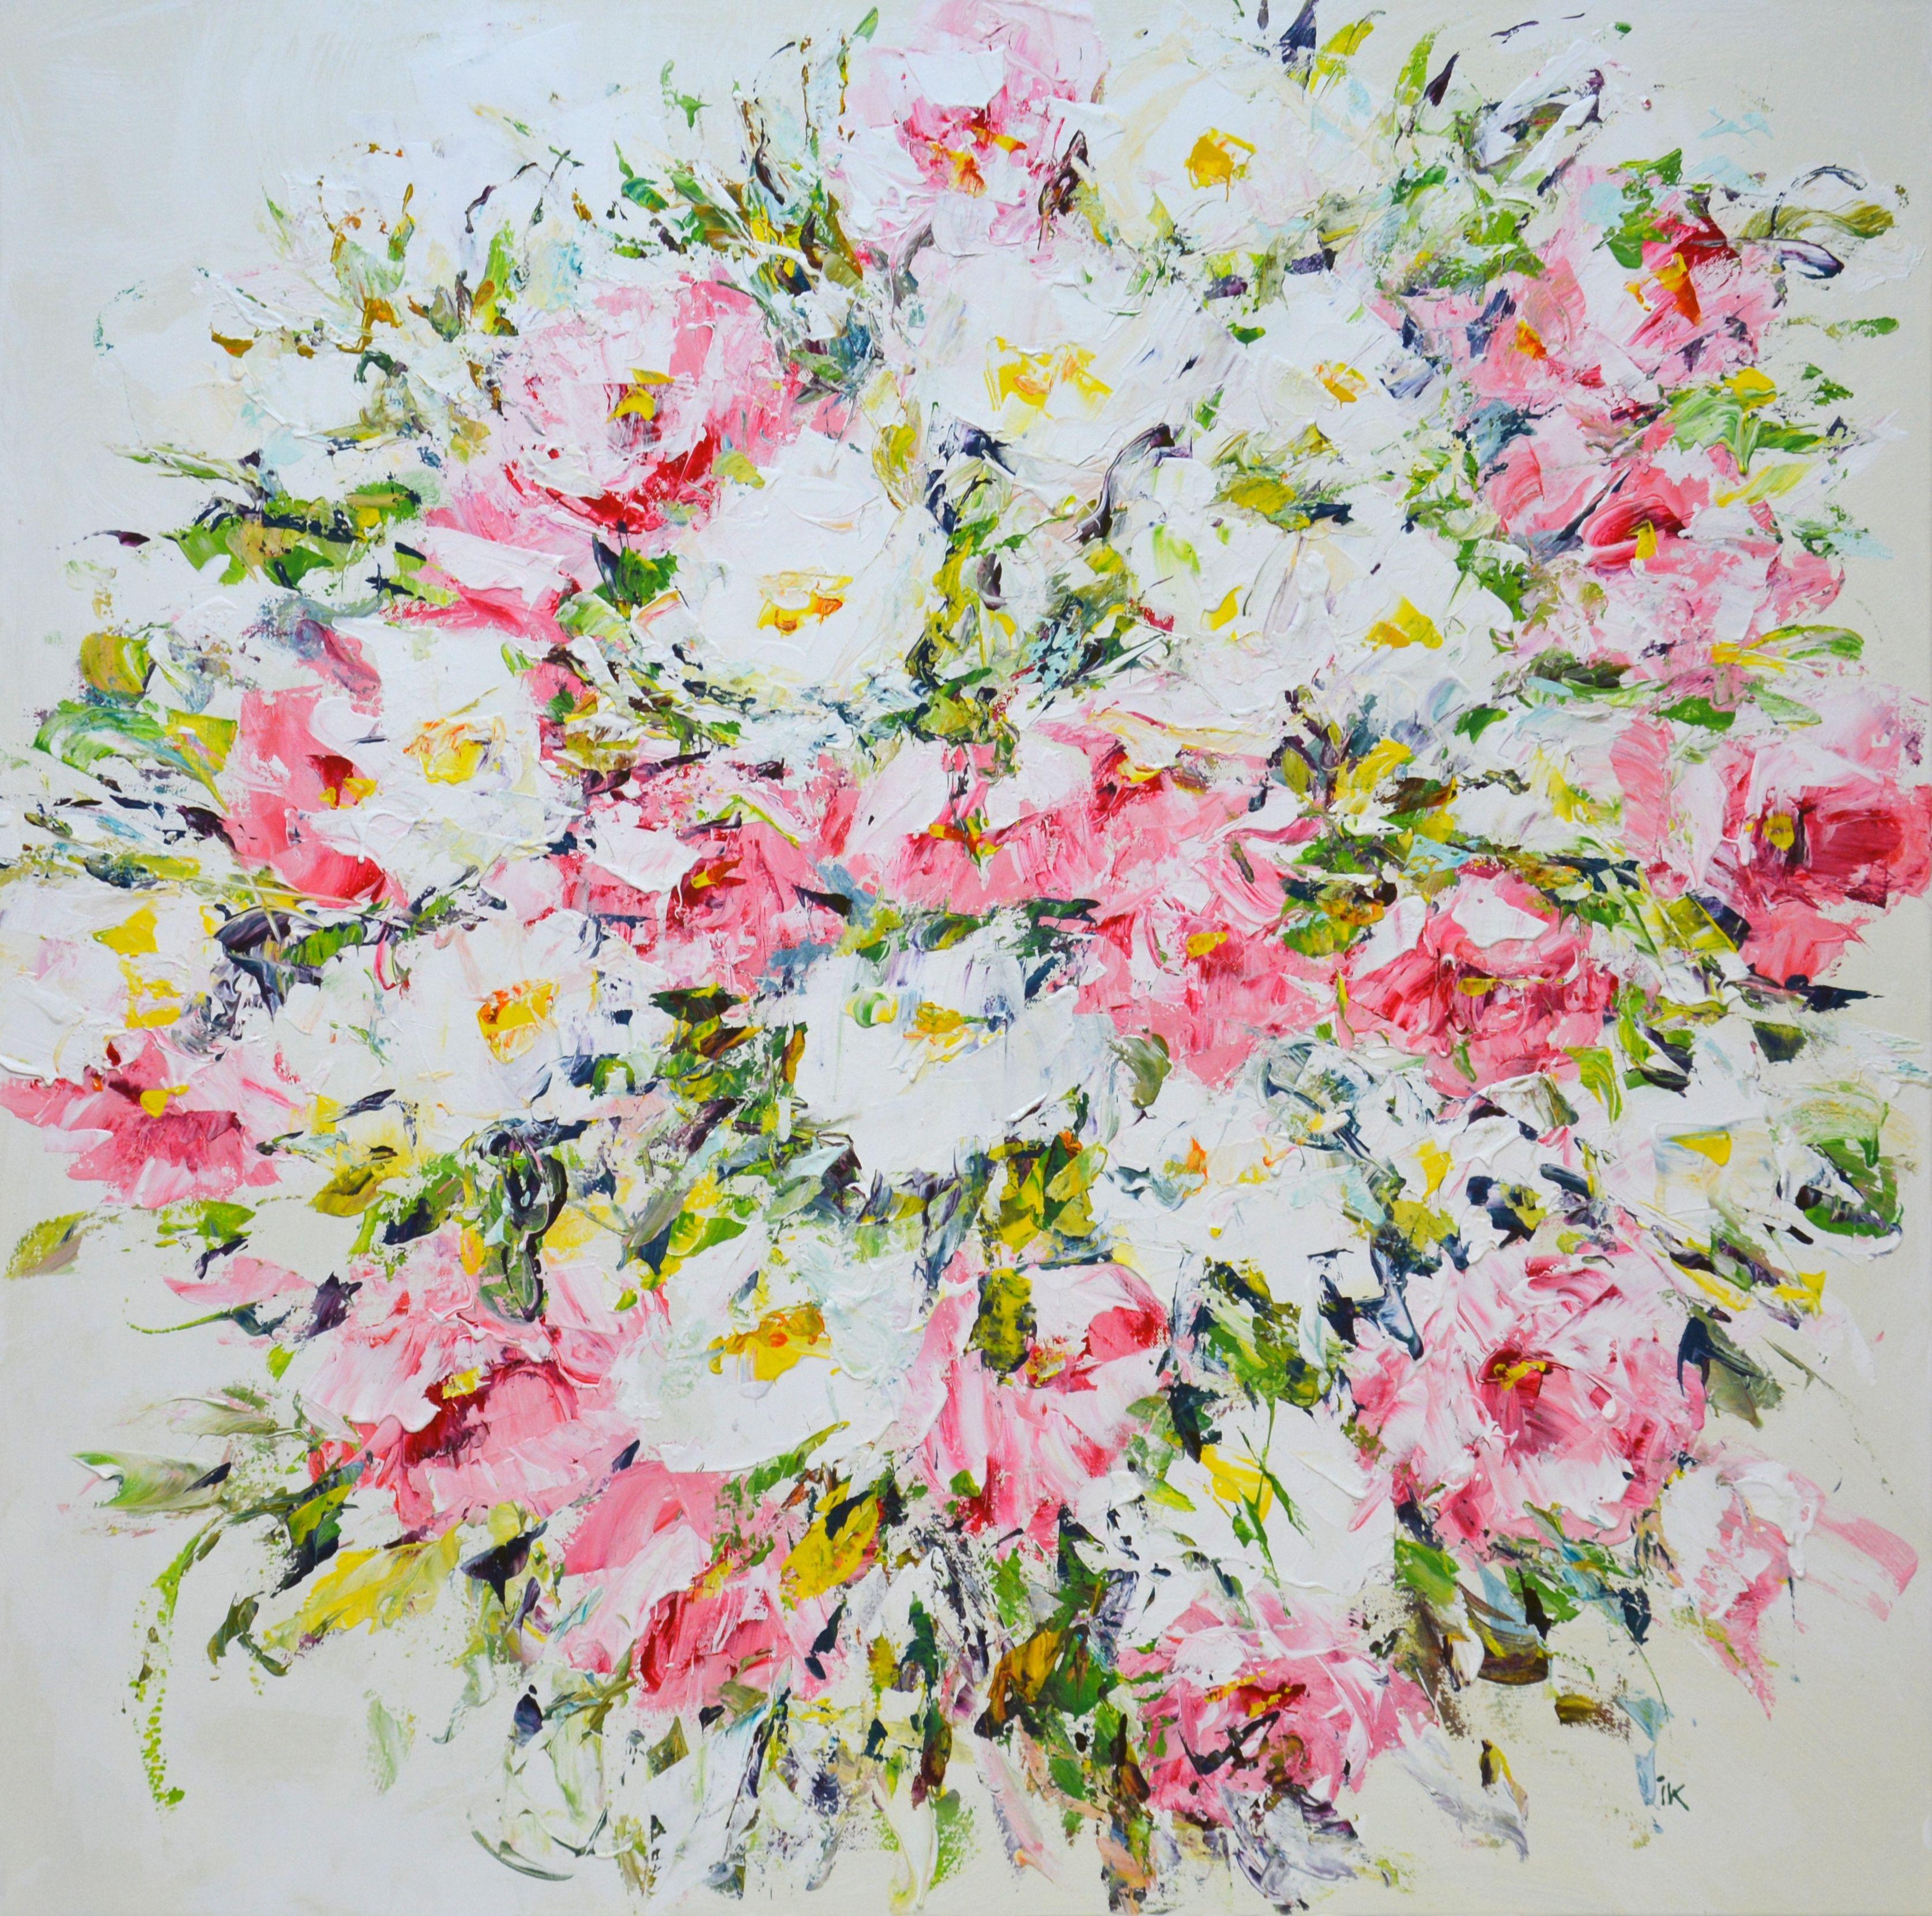 Flowers. Pink and white. Floral still life: pink and white flowers on an abstract white background, created with brushes and a spatula. The picture is filled with positive, solar energy, tenderness. Part of a permanent series of floral arrangements.